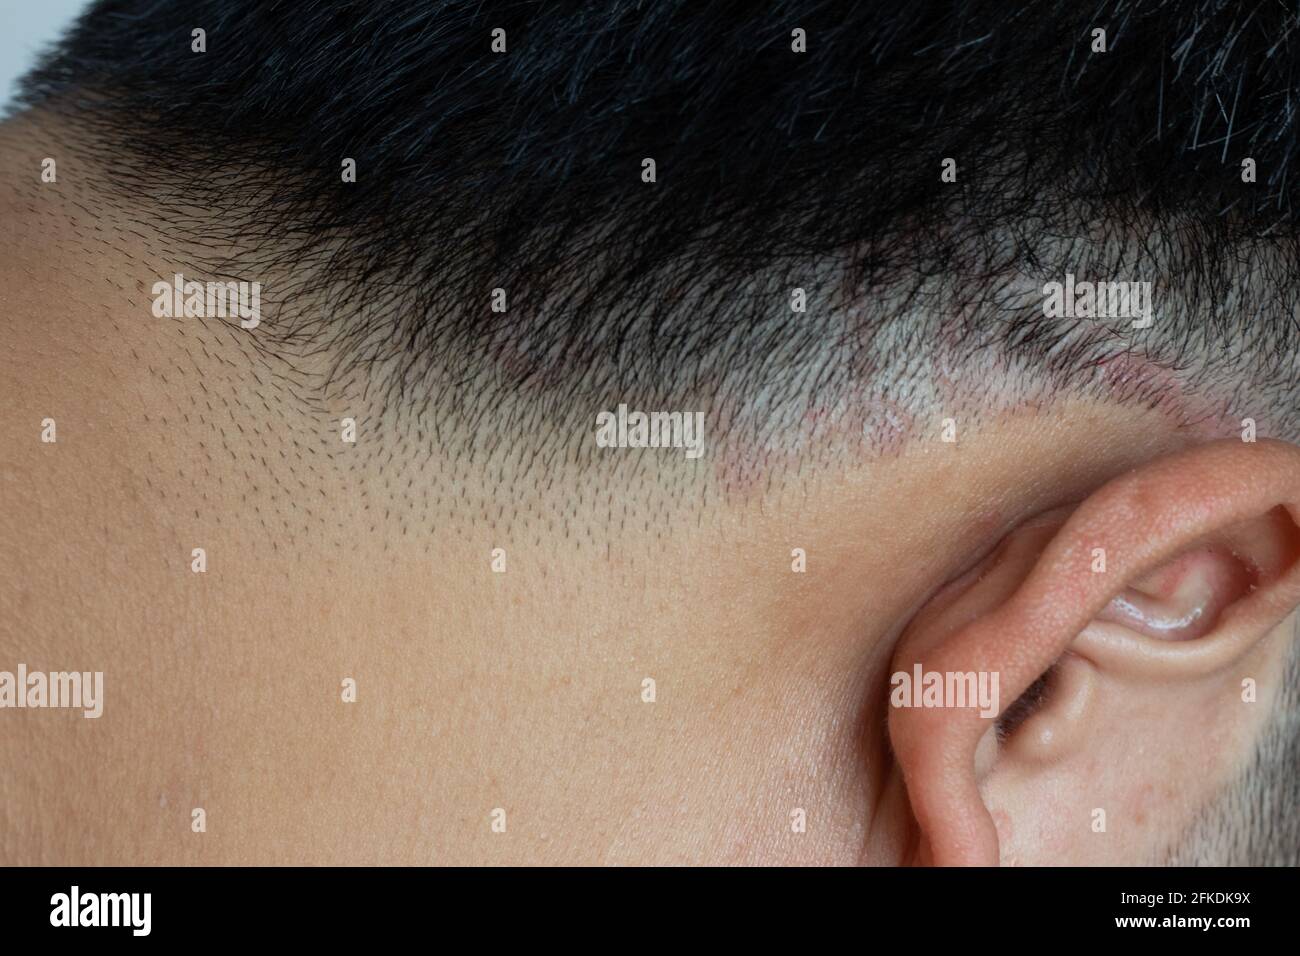 Closed up of ringworm (tinea) on head of asian man (Dermatitis) Stock Photo